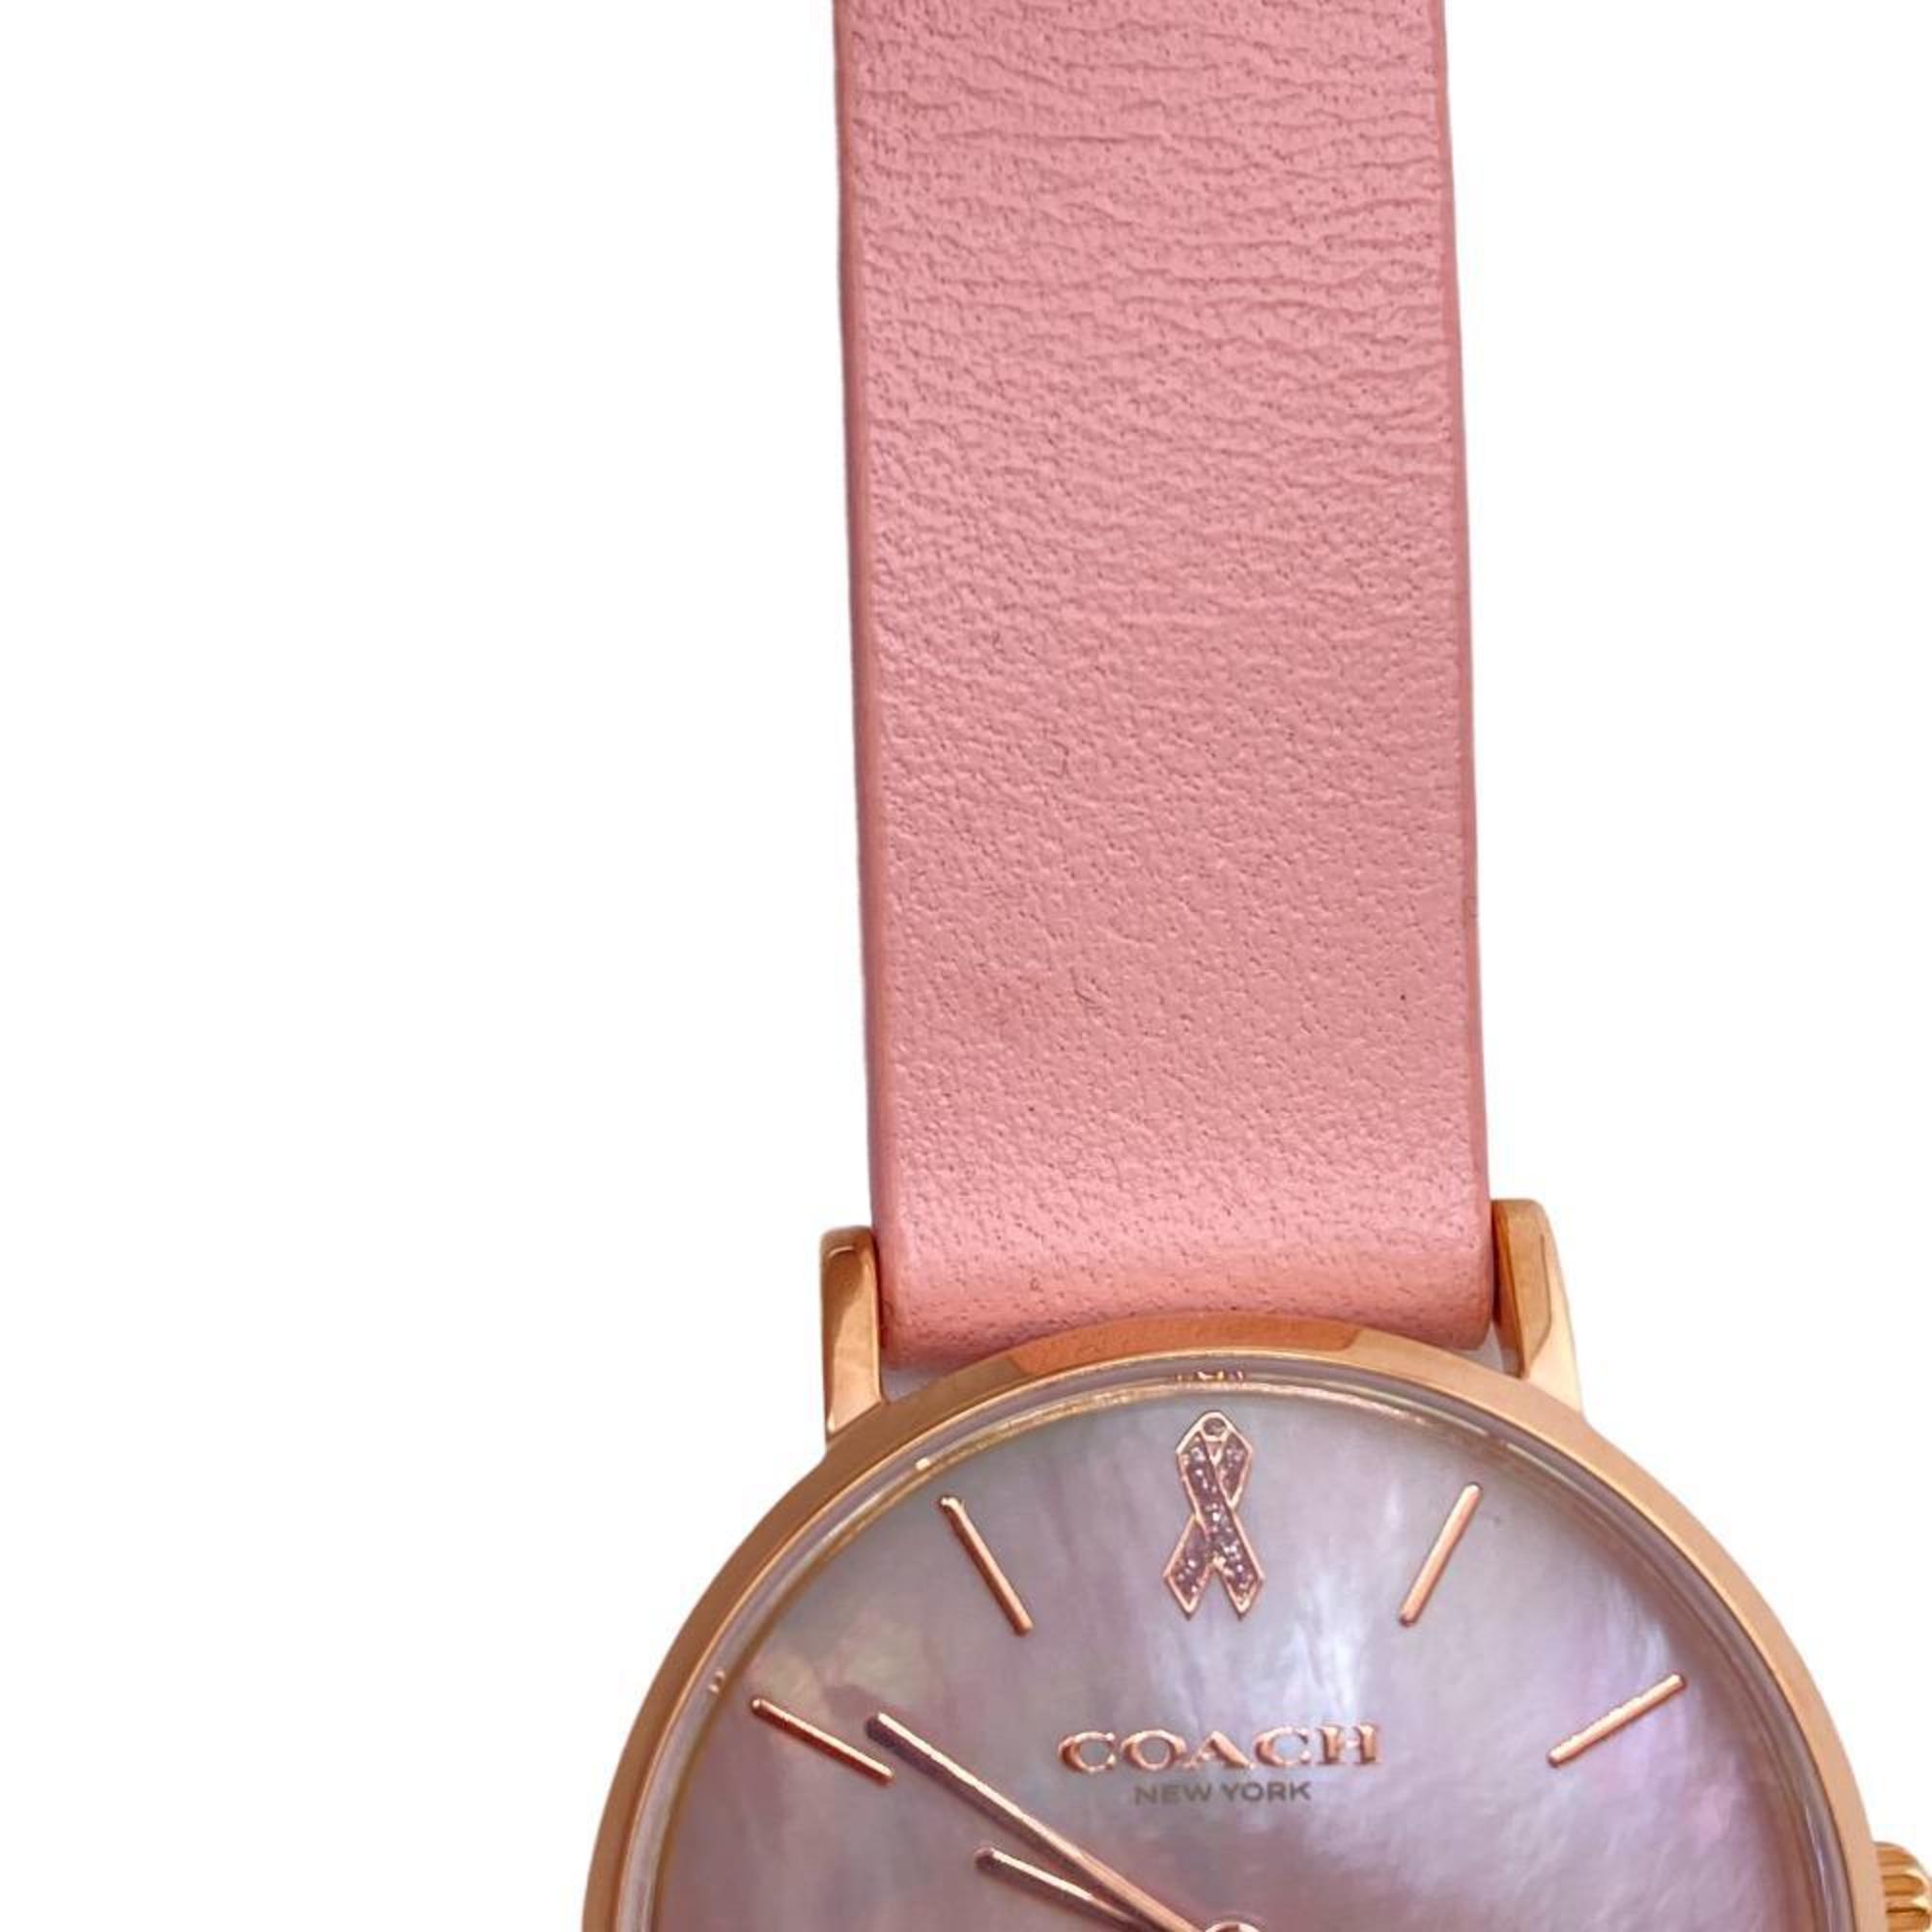 COACH CO-14503628 PERRY Quartz Pink Mother of Pearl Watch Women's Z0006557